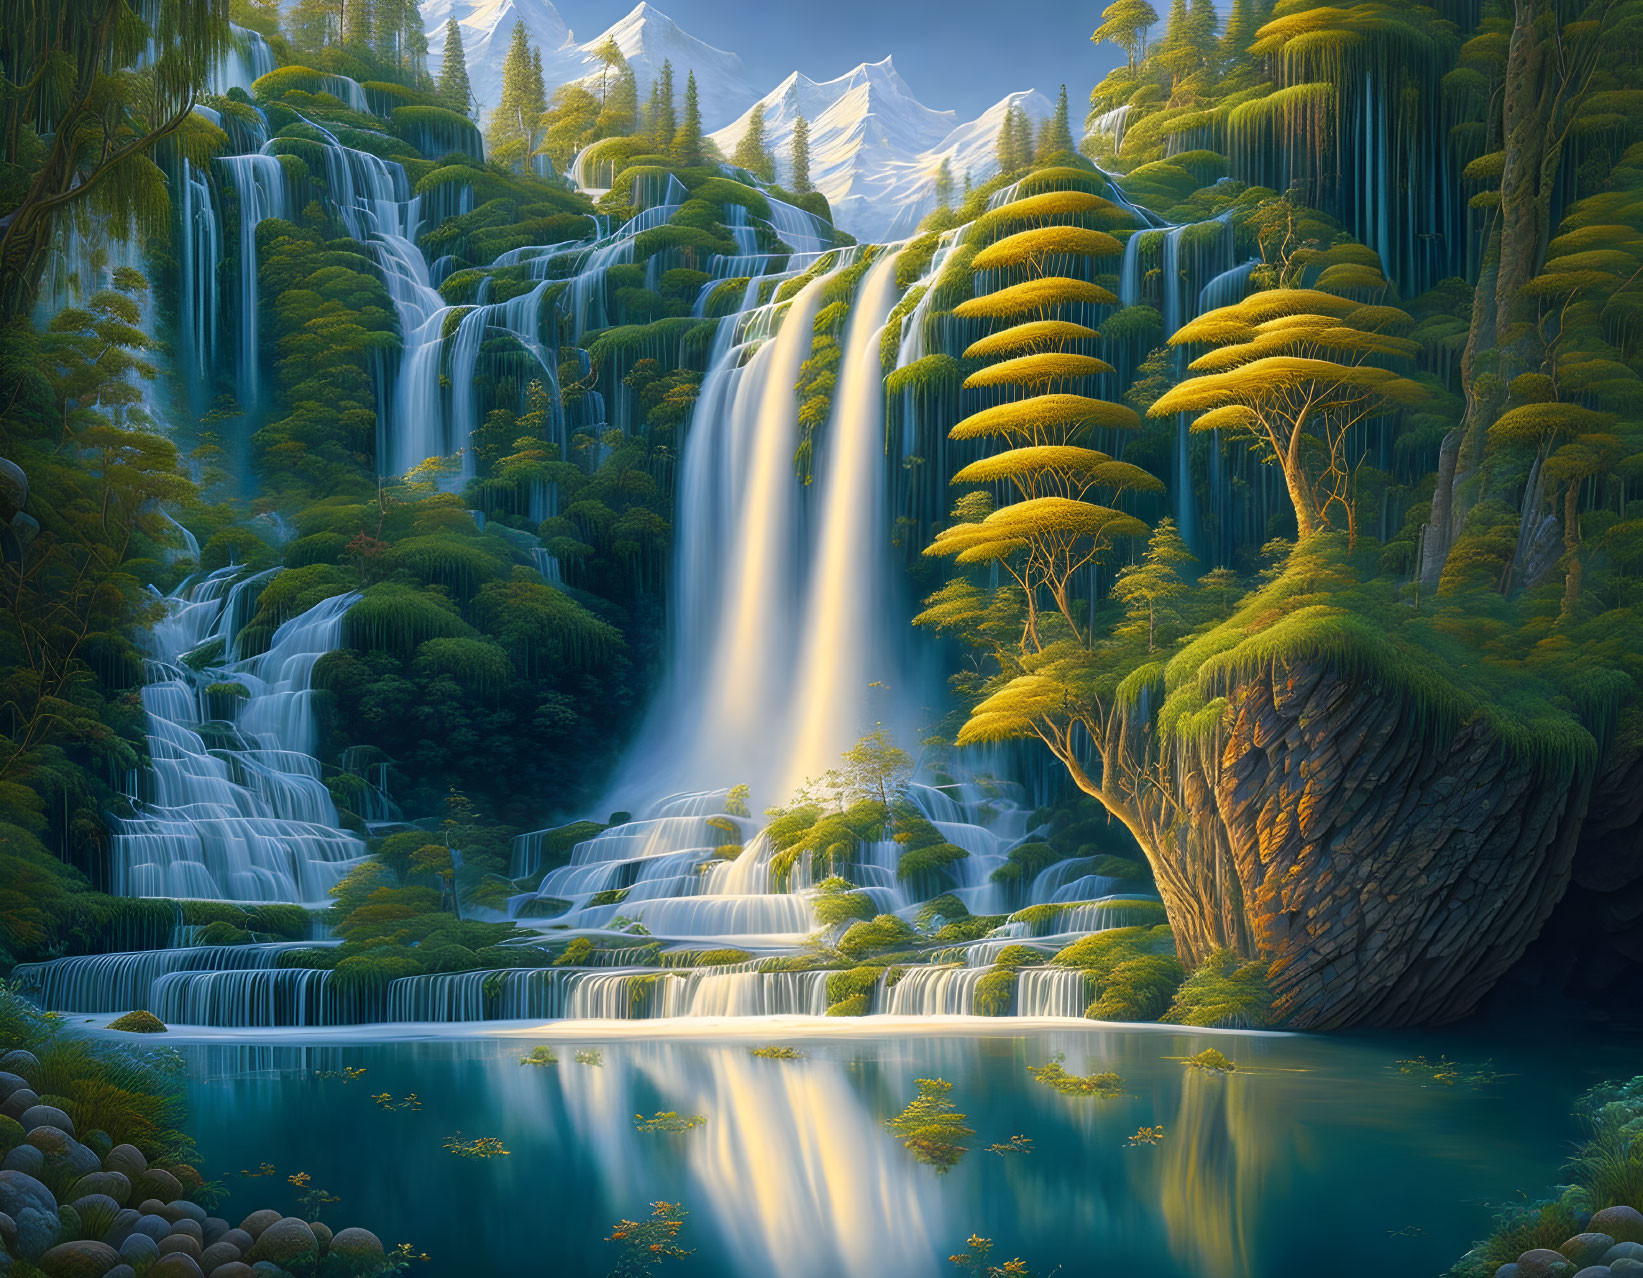 Extremely detailed image of Beautiful Waterfalls